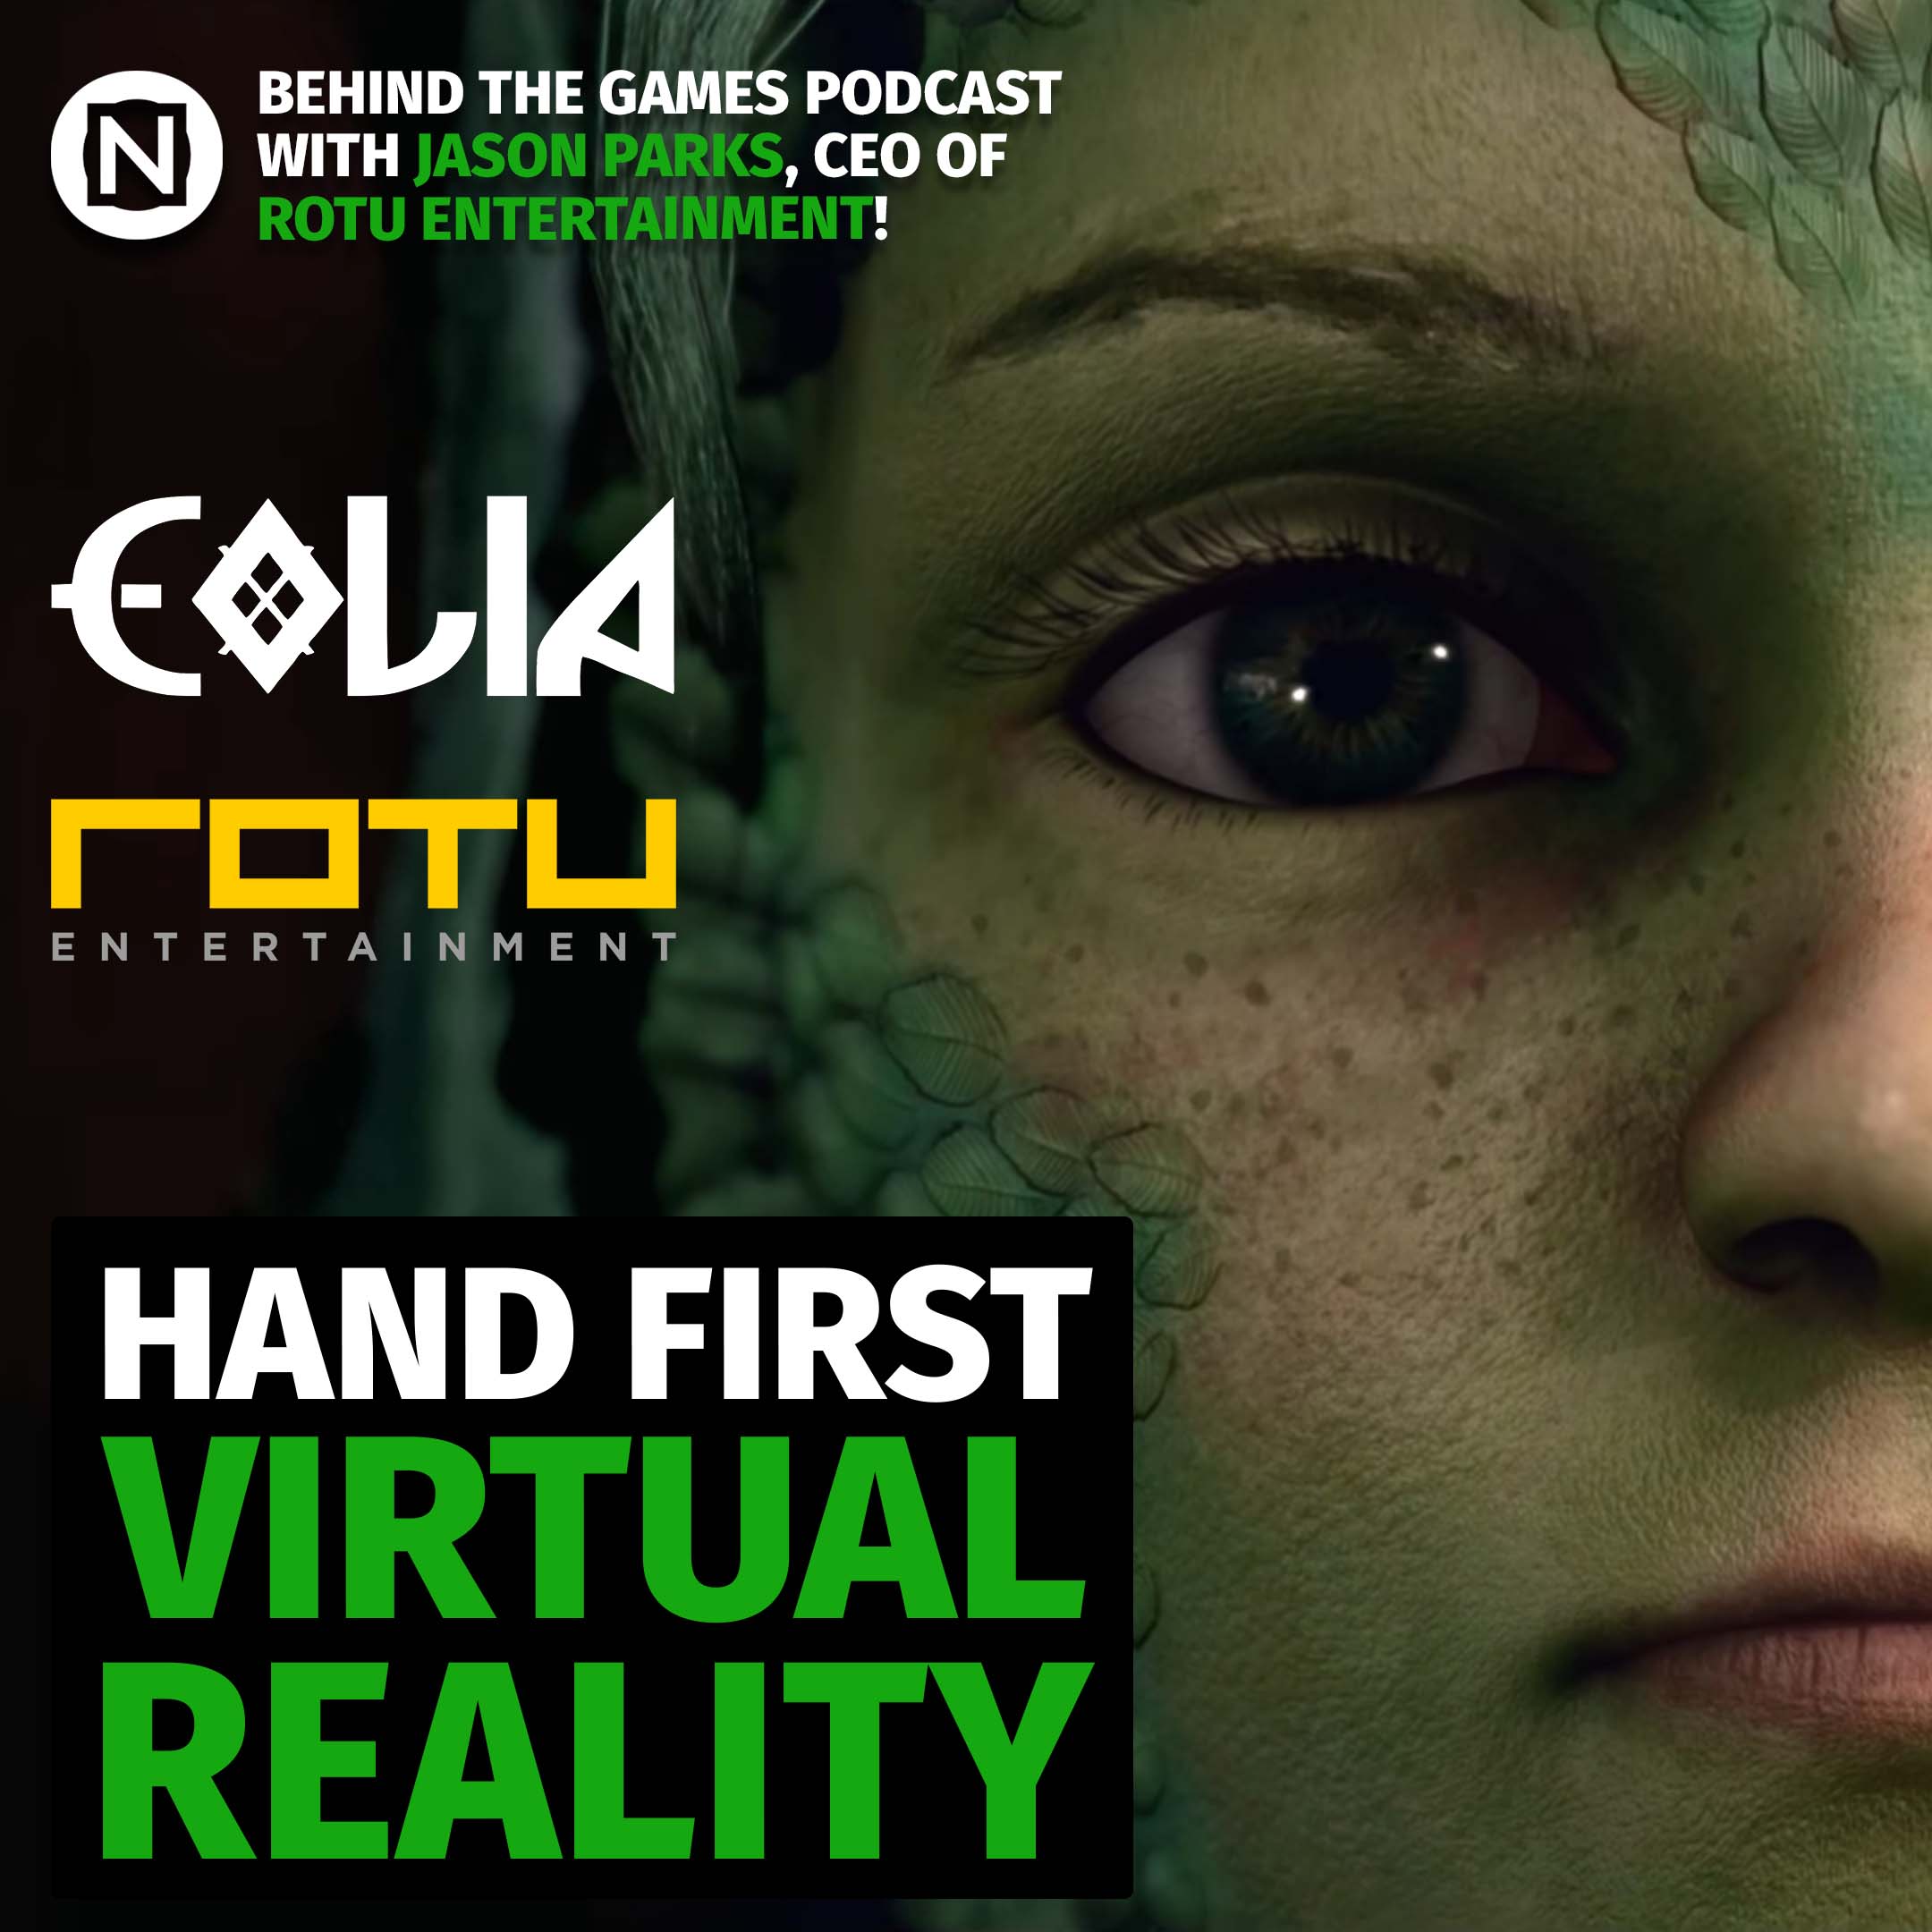 Hand First VR – Behind The Games chat with Jason Parks of ROTU